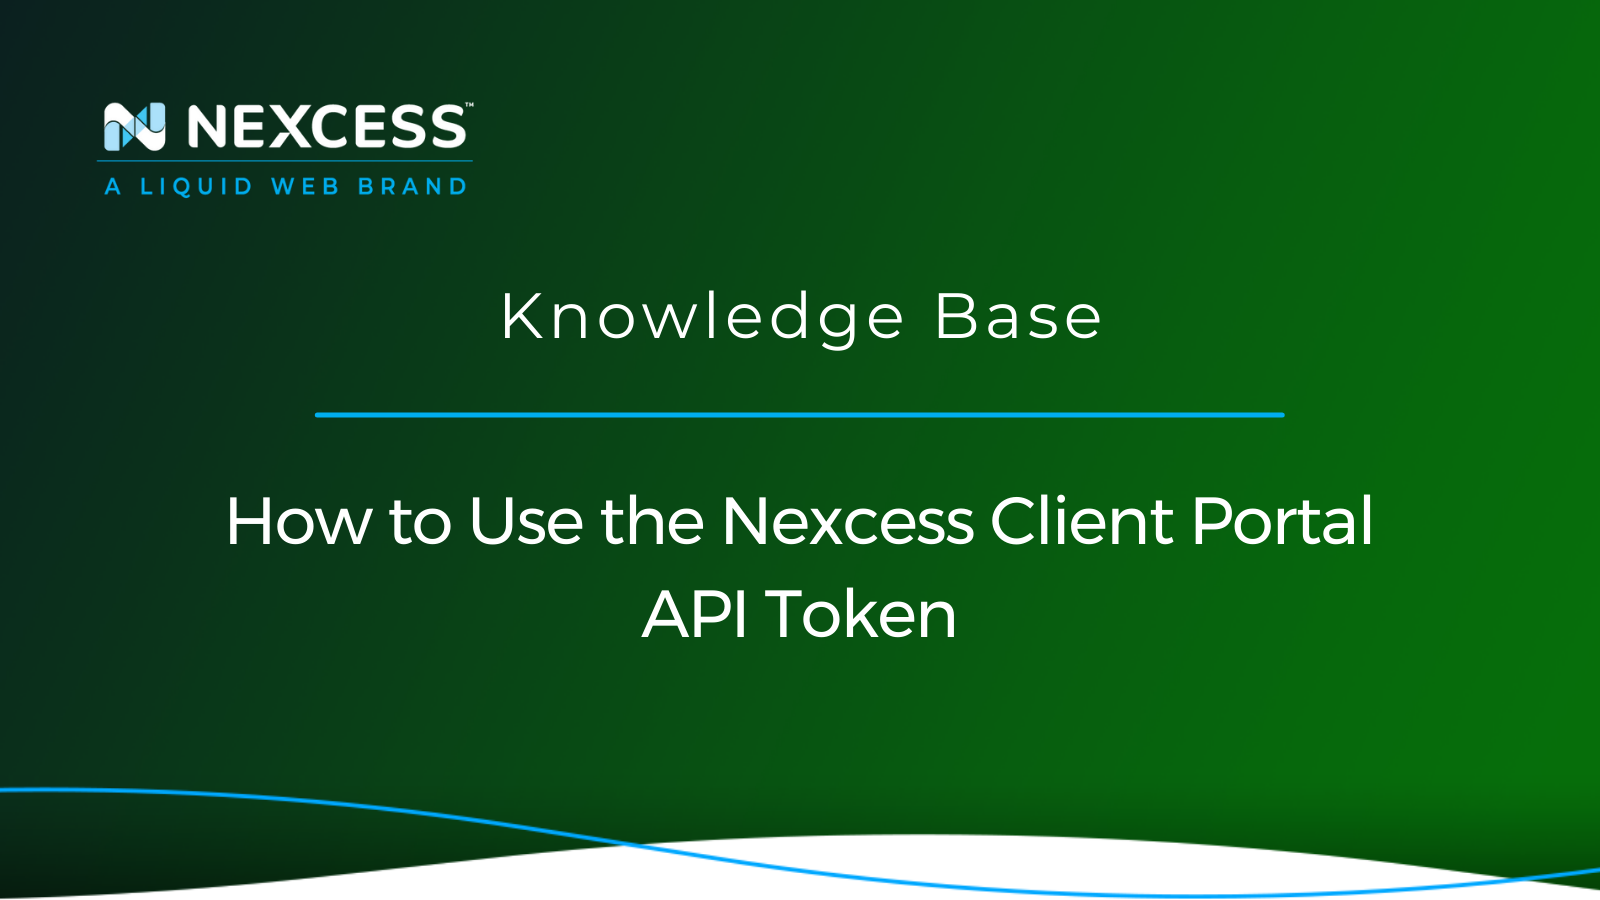 How to Use the Nexcess Client Portal API Token